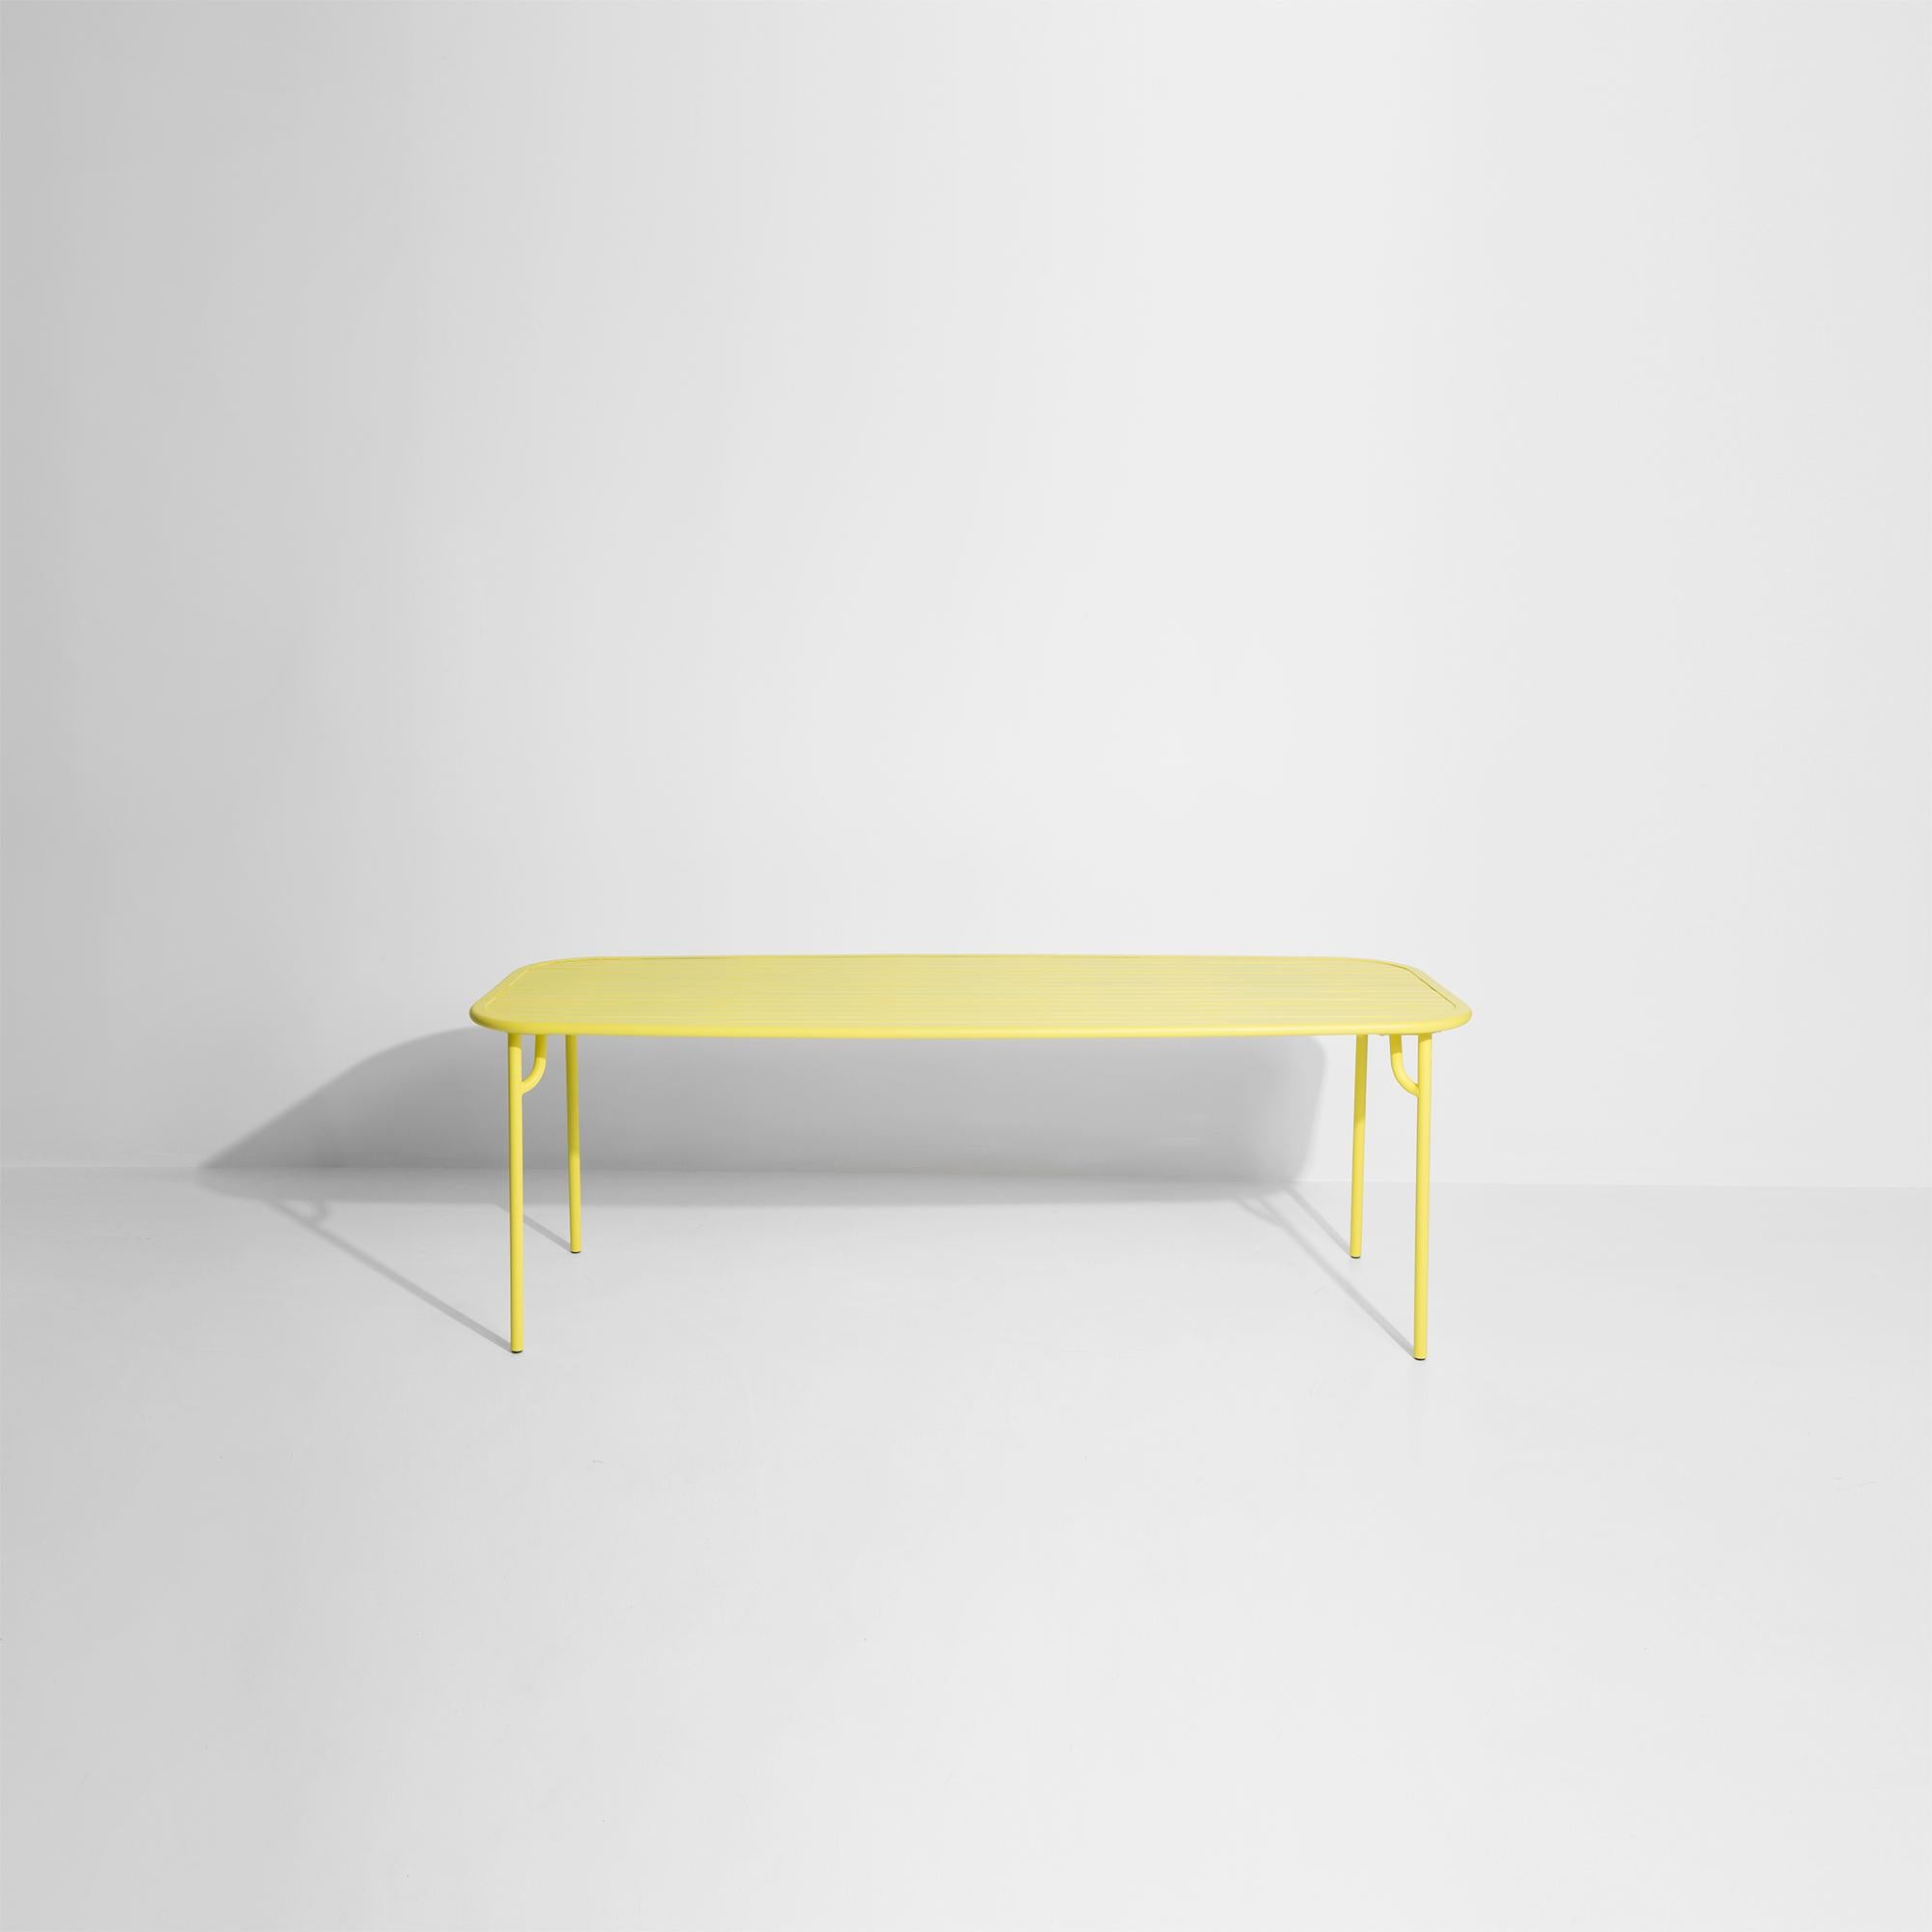 Petite Friture Week-End Large Rectangular Dining Table in Yellow with Slats In New Condition For Sale In Brooklyn, NY